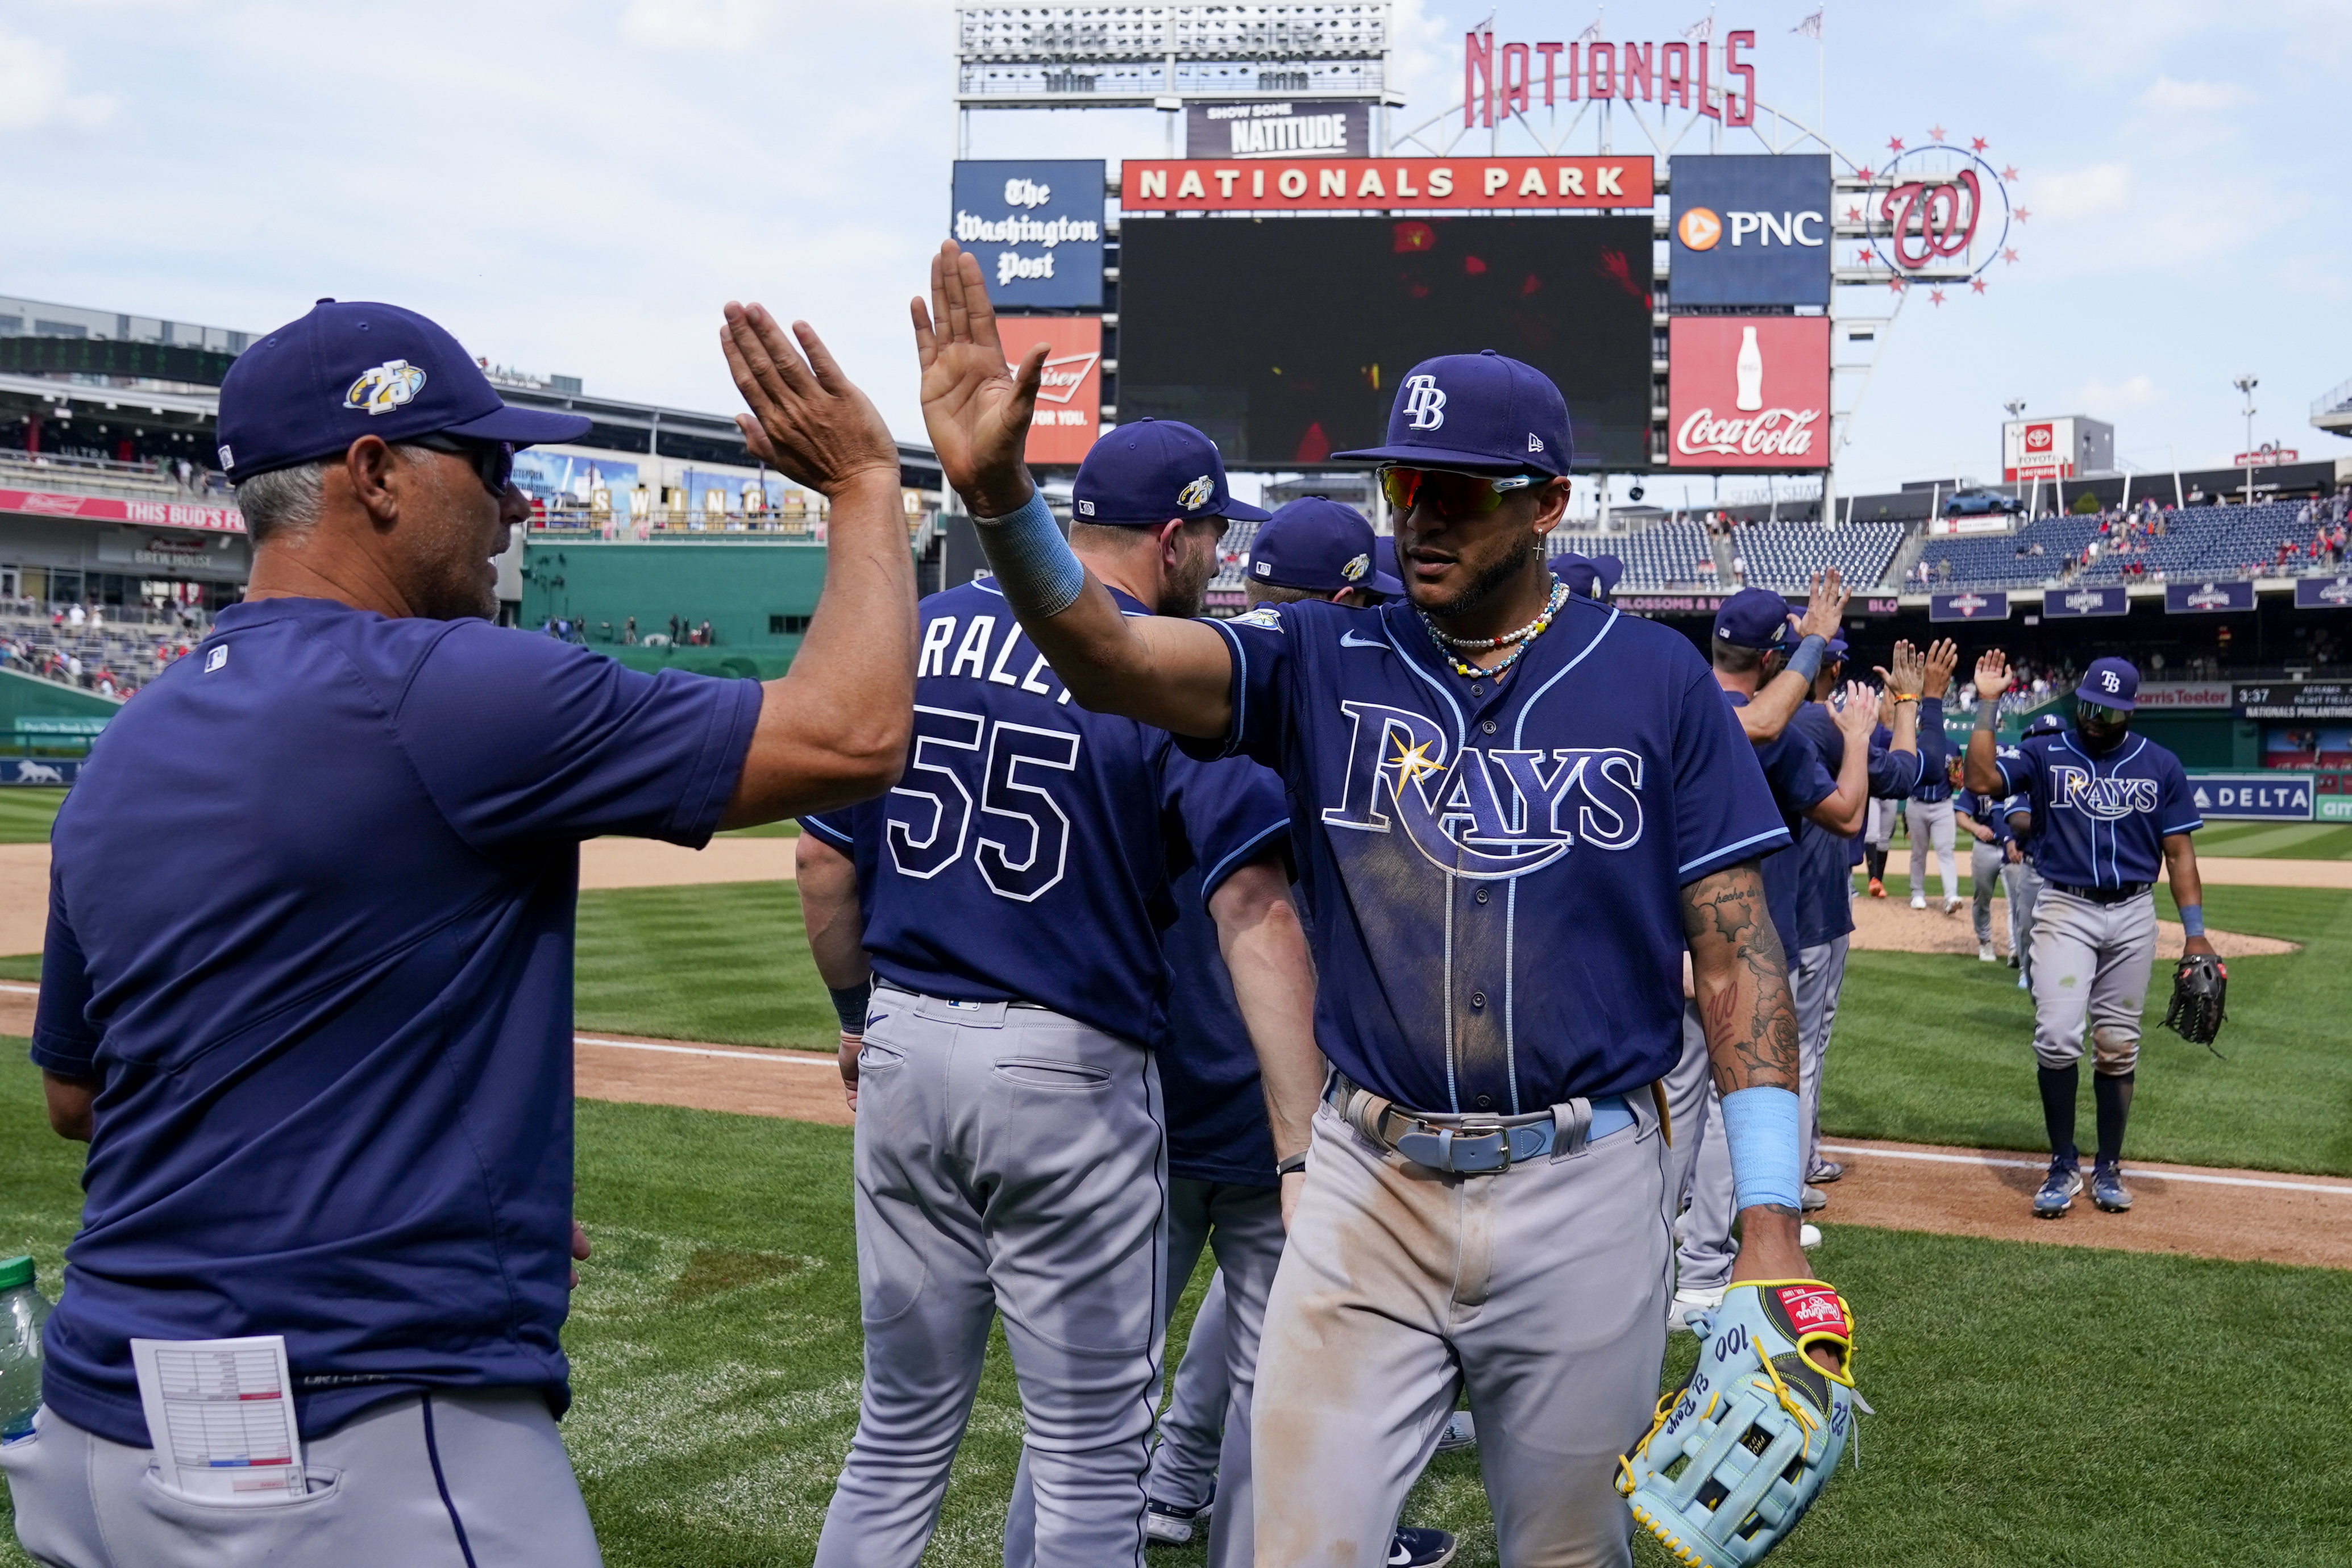 Tampa Bay Rays off to best start (6-0) in franchise history after